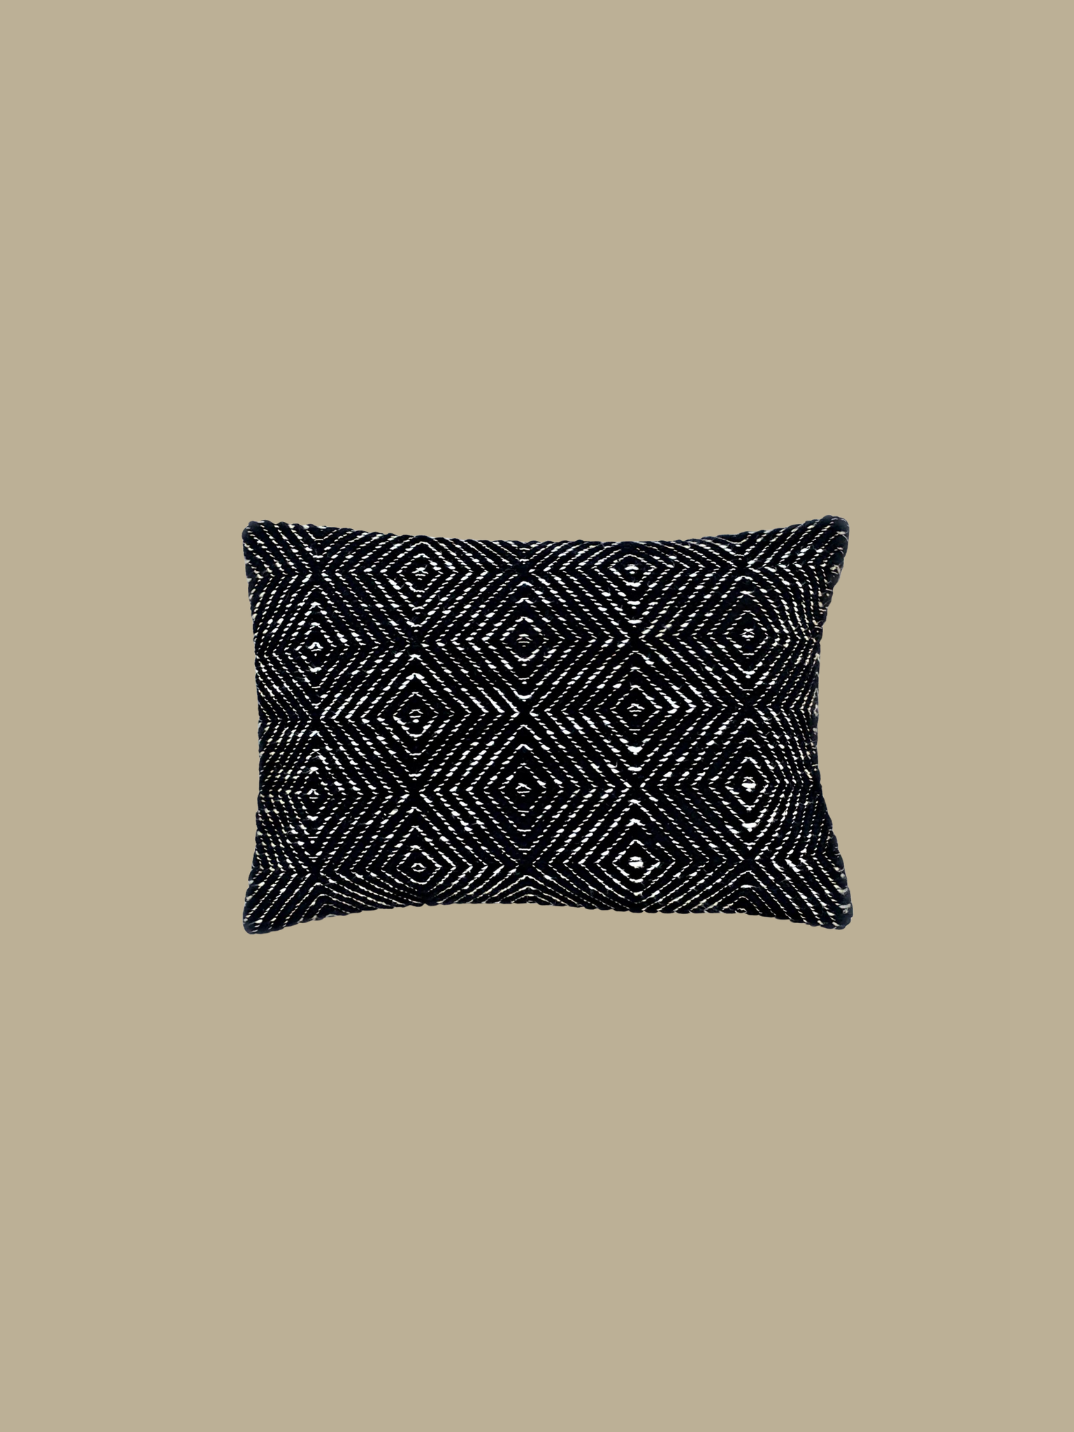 Nico cotton lumbar cushion shop eco-friendly woman-owned sustainable brands home goods made in India bohemian classic style